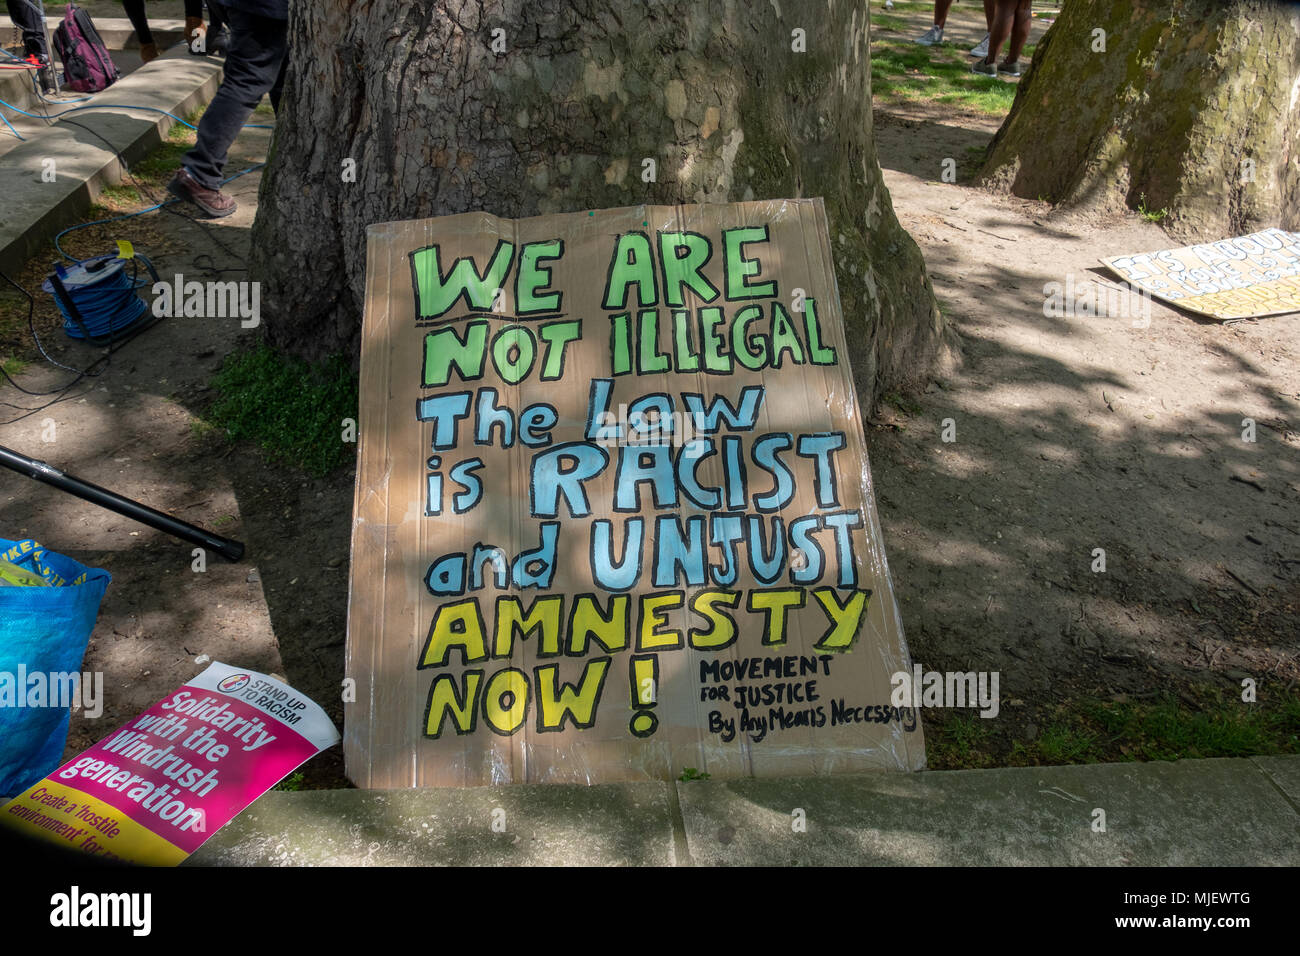 London, UK, 5th May 2018, Demonstrators attend a march for Windrush opposite Downing Street in an attempt to overturn the governments immigration policy stating Theresa May's current policy is racist. Credit: adrian looby/Alamy Live News Stock Photo